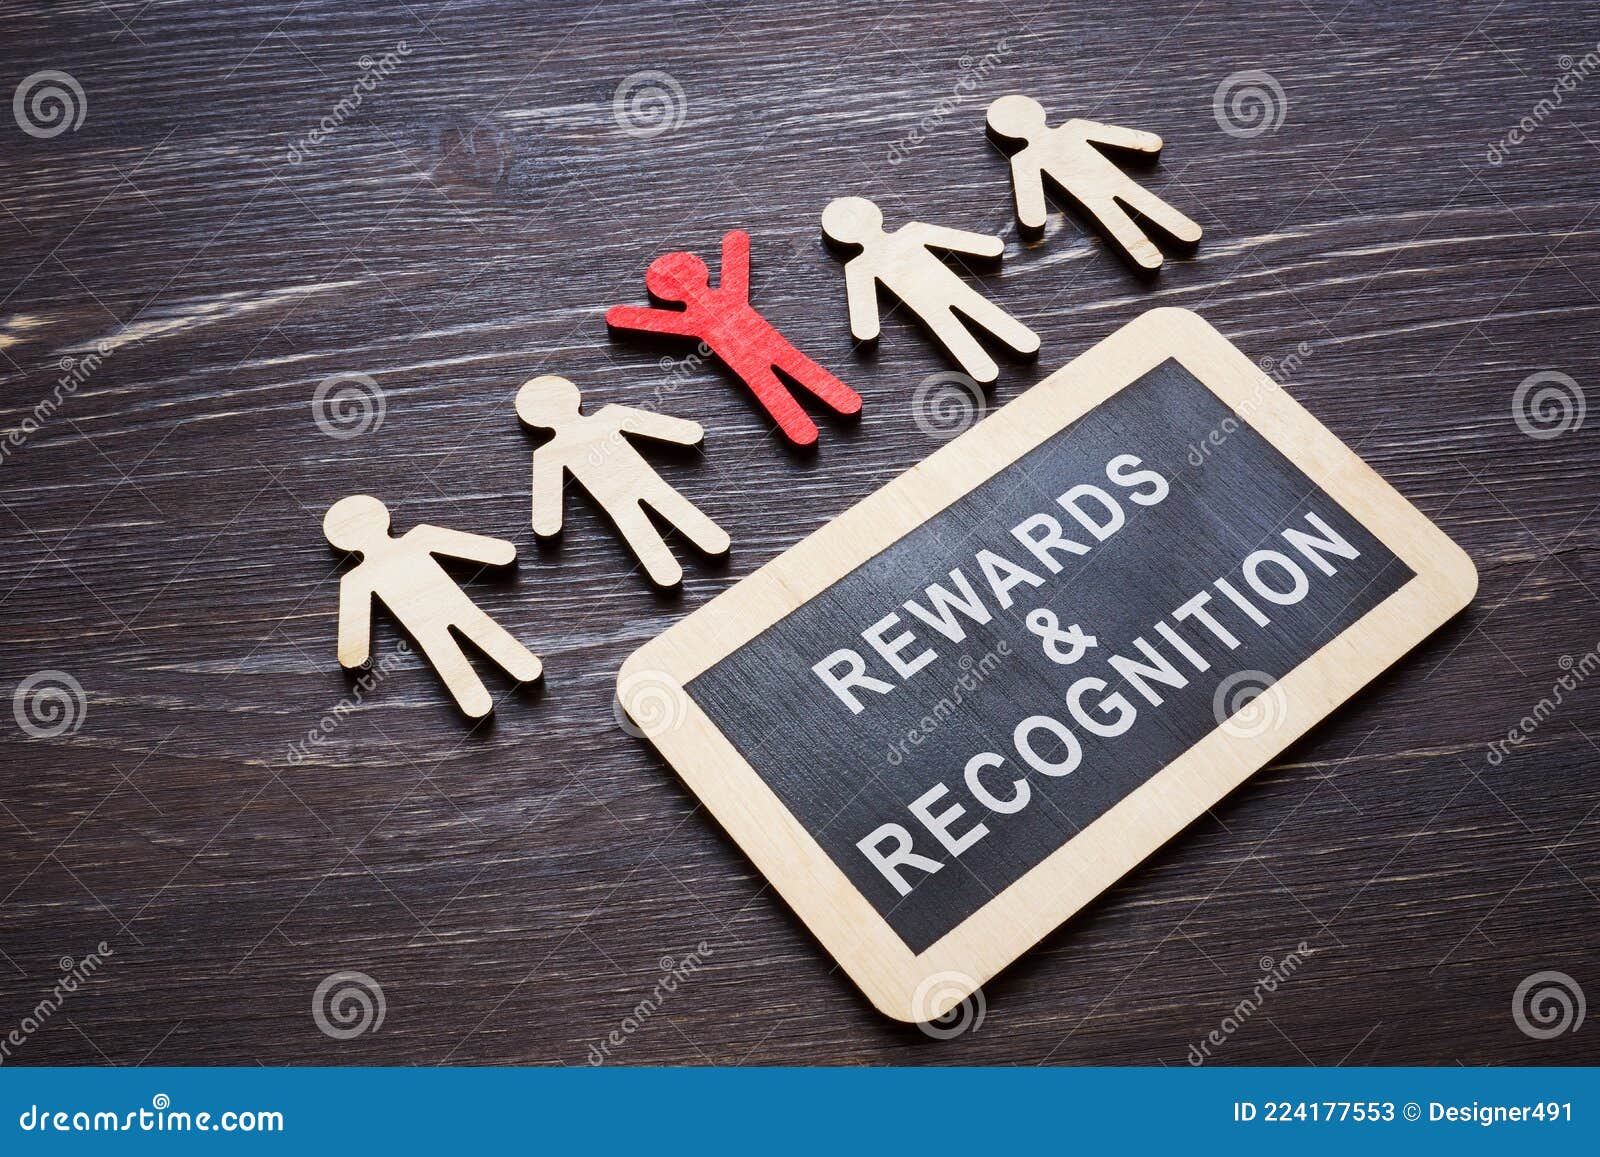 plate with rewards and recognition words and employee figures.